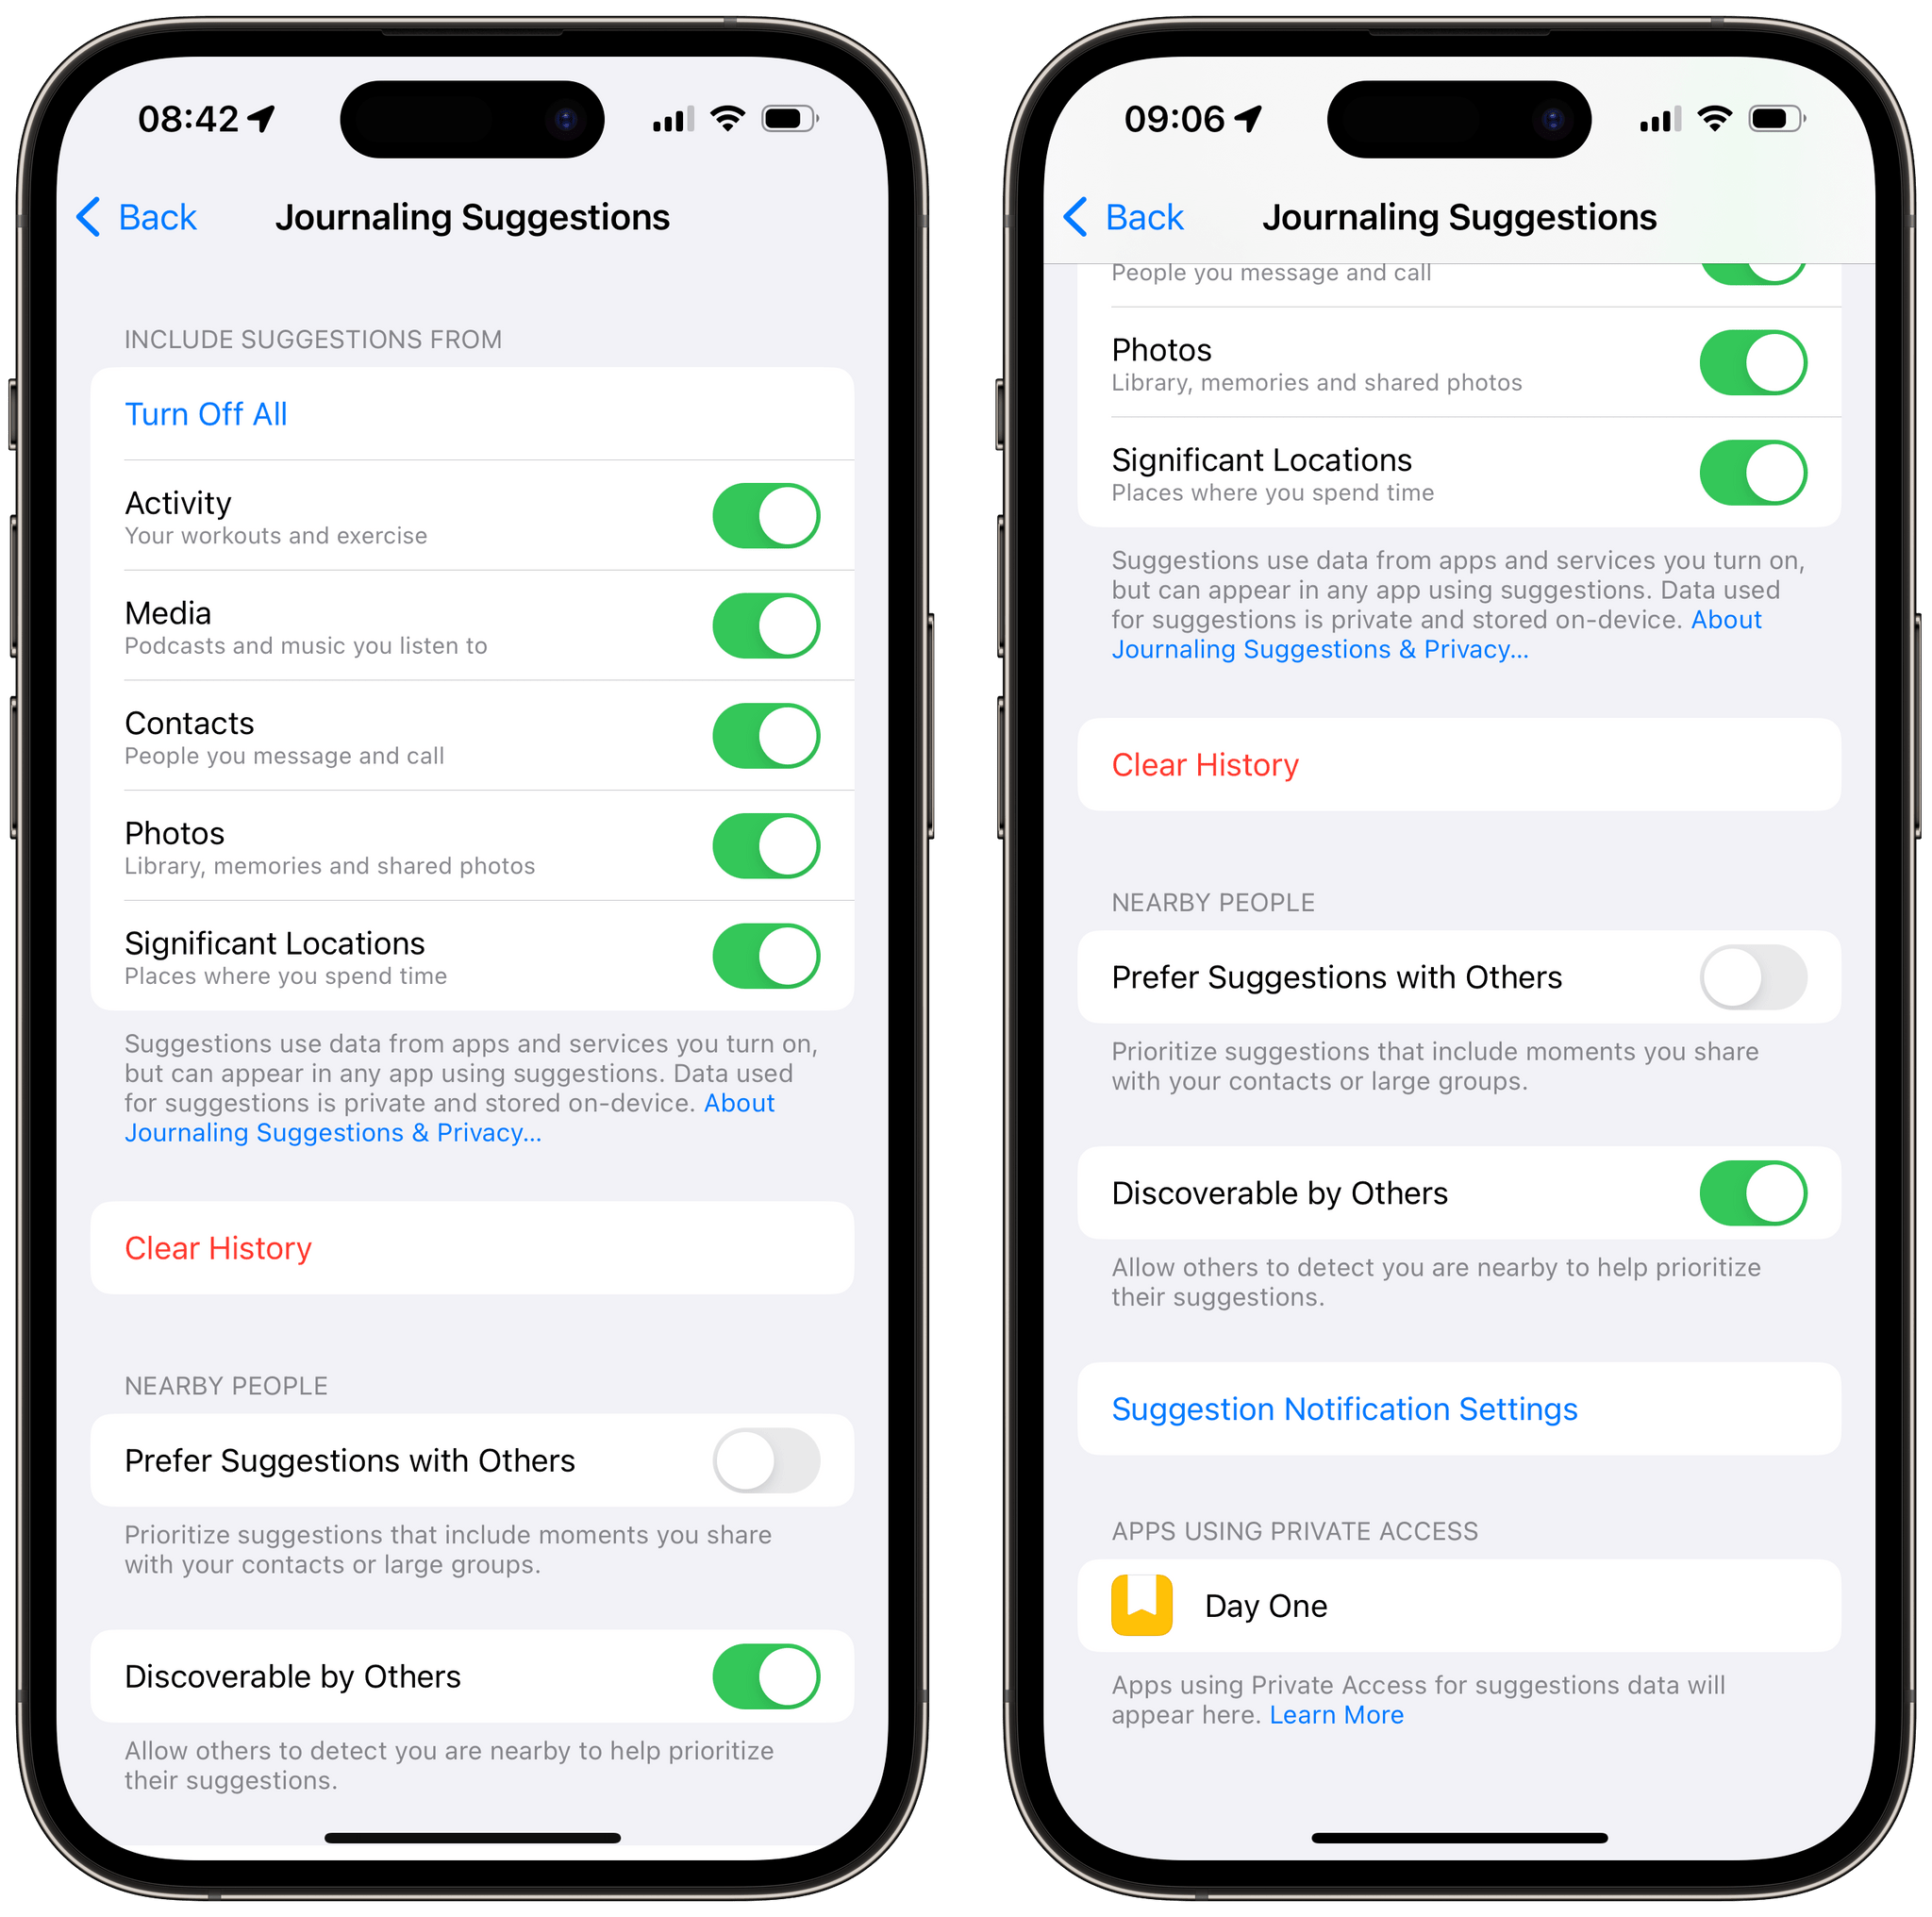 Journaling suggestions can be turned off by data type in the iOS privacy settings. This is also where you can manage access to journaling suggestions by third-party apps.